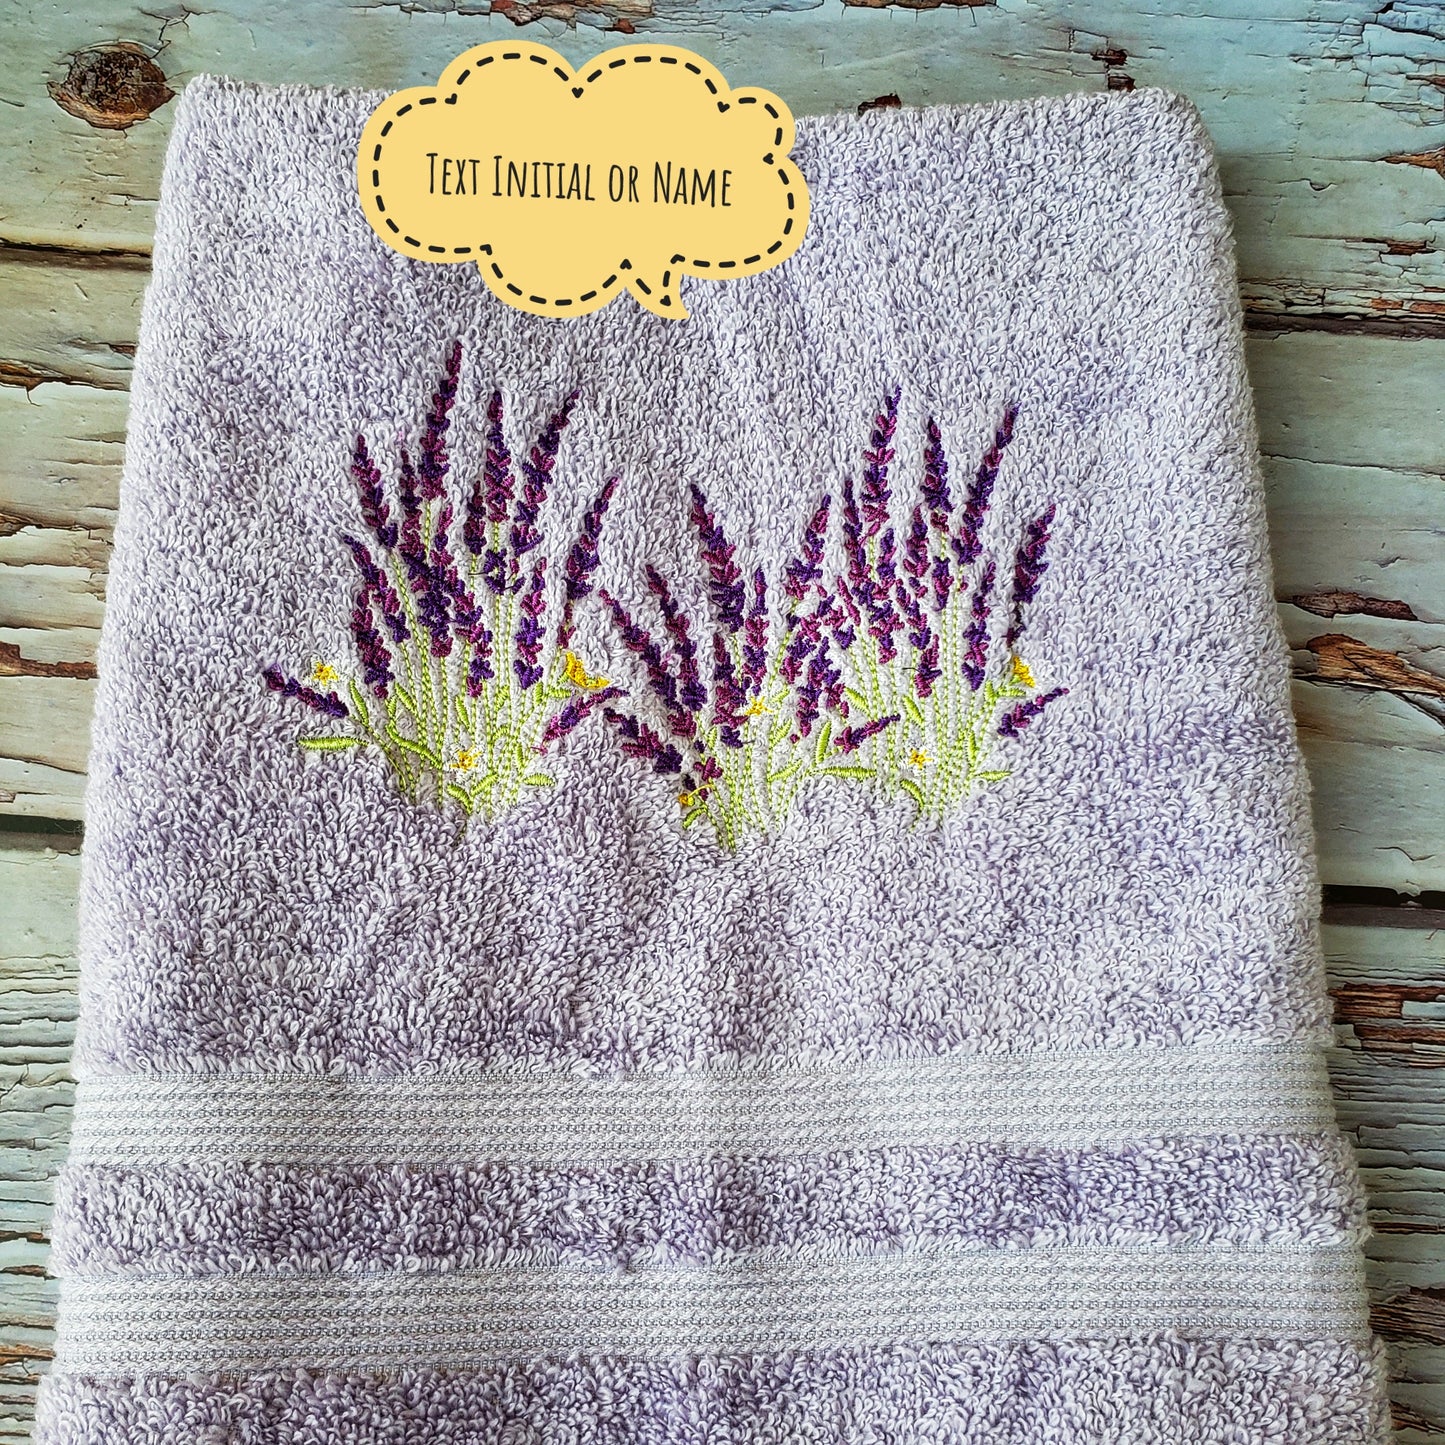 embroidery personalized towel